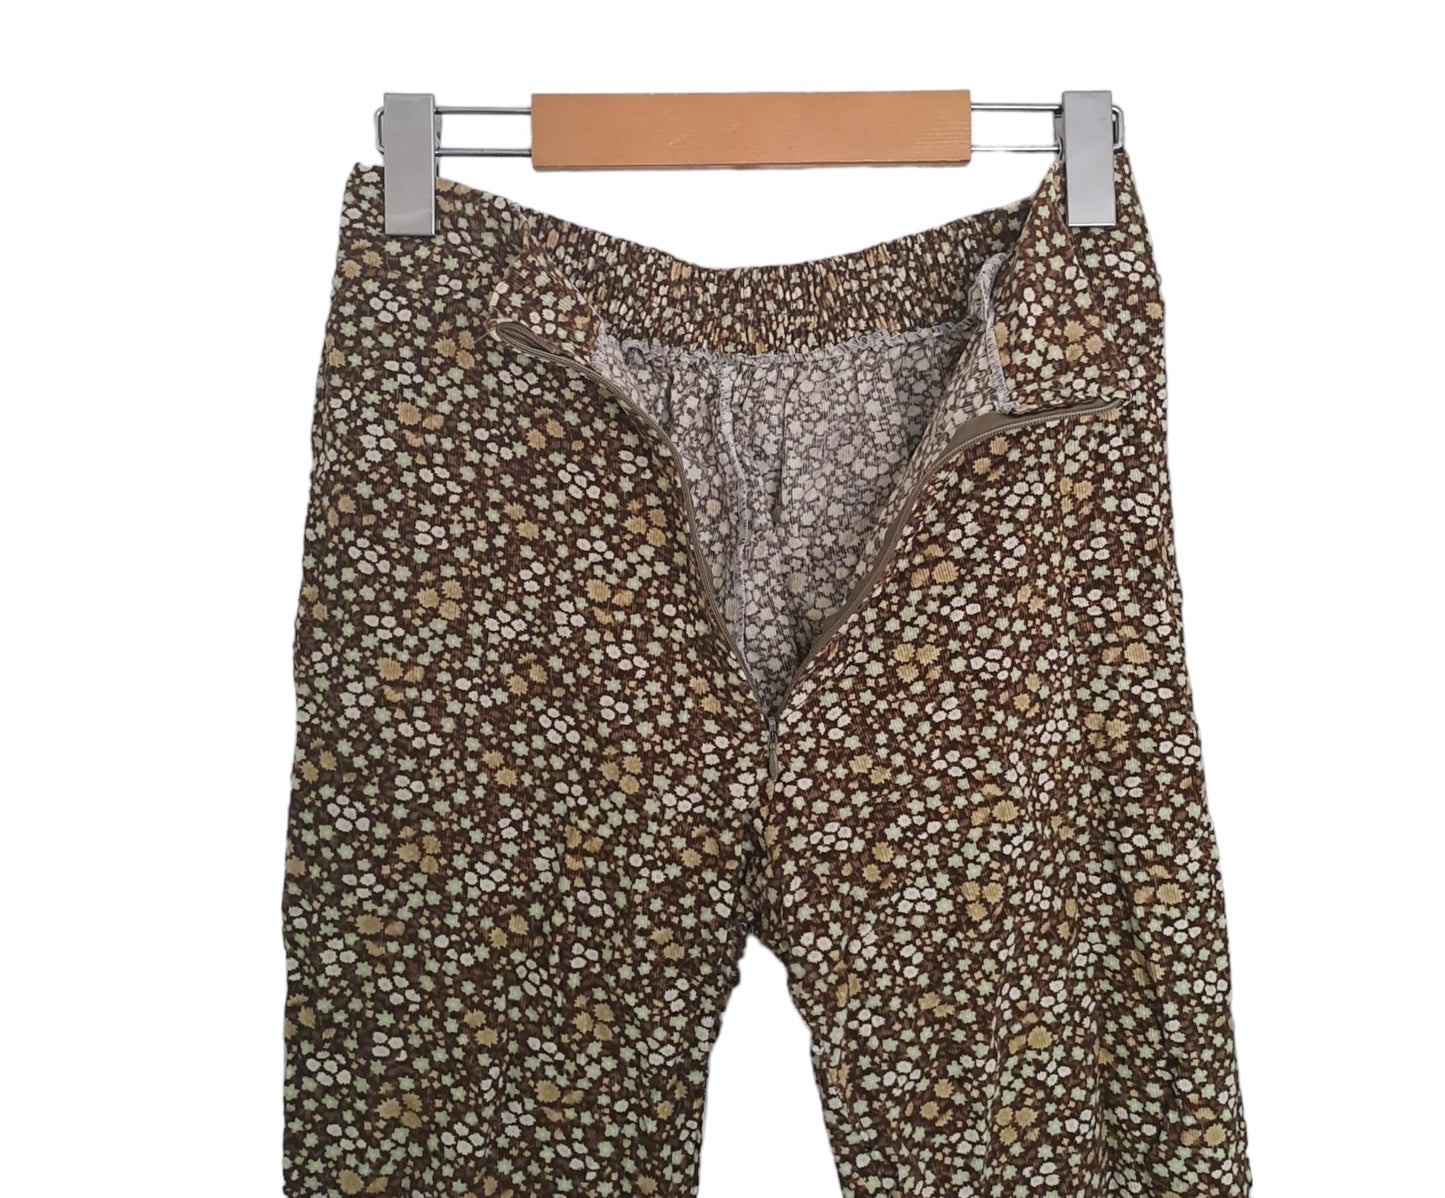 Floral Print Women's Trousers